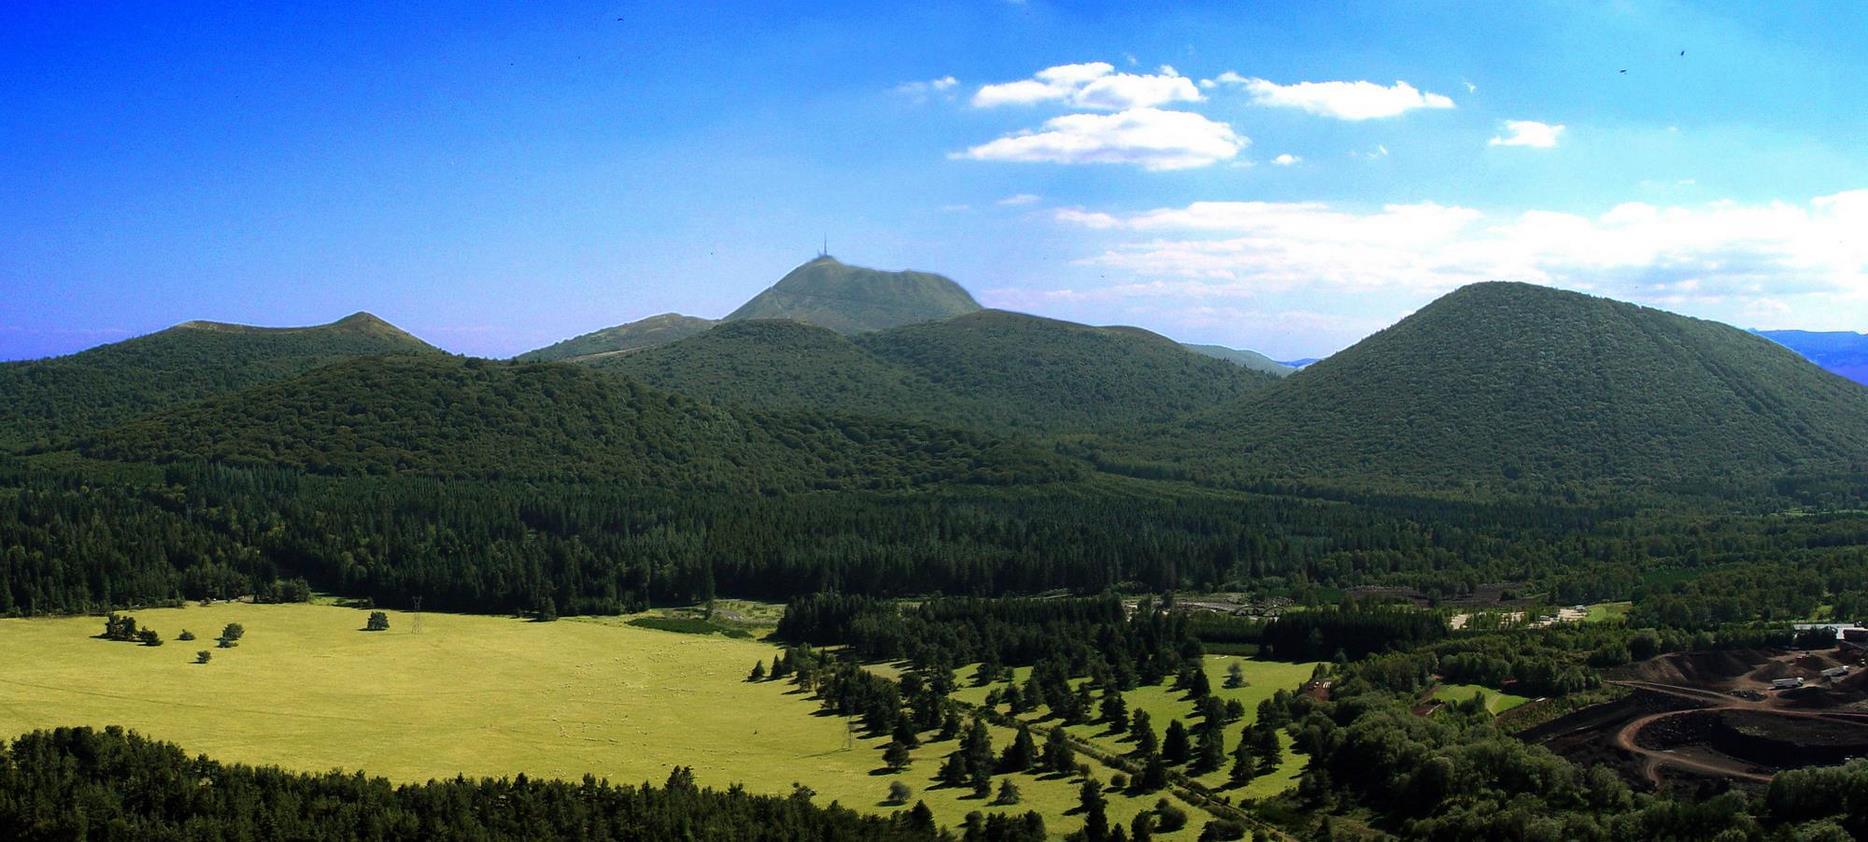 The Chaines des Puys and the summit of the Puy de Dôme